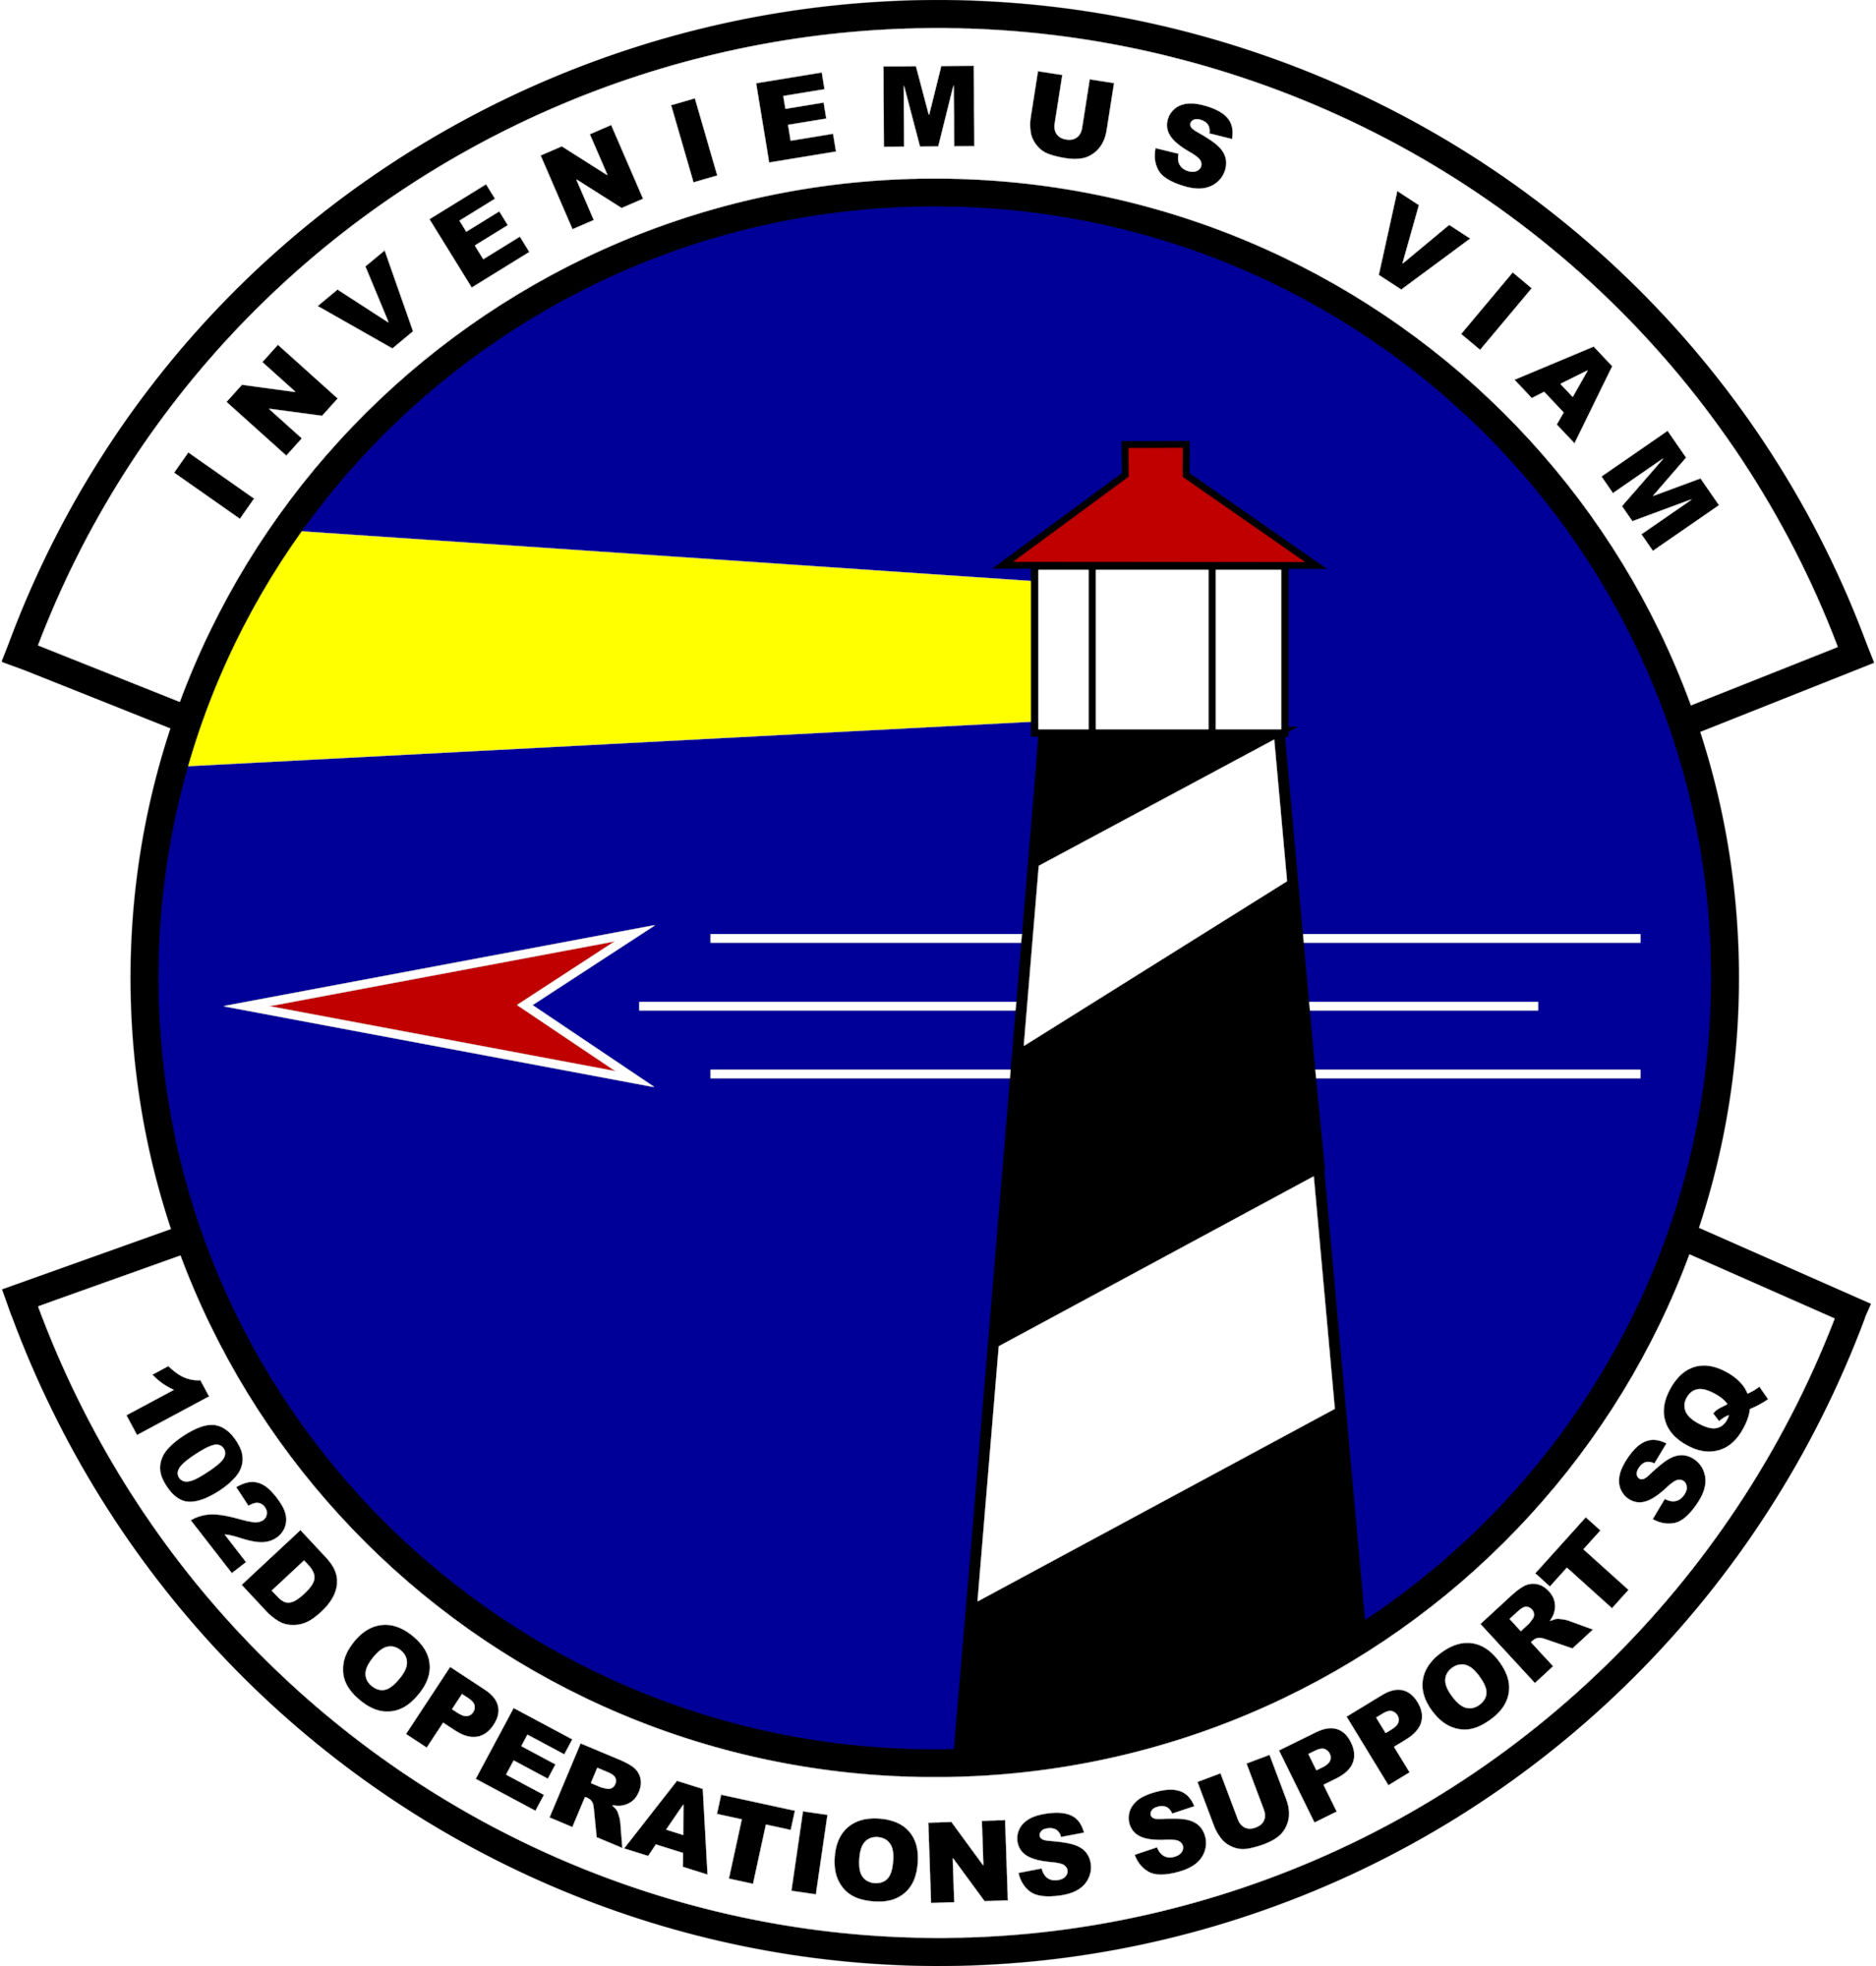 The unit emblem of the 102nd Operations Support Squadron depicts a lighthouse on a blue field, its light shining to the left, in the same direction as a delta shape streaking by.